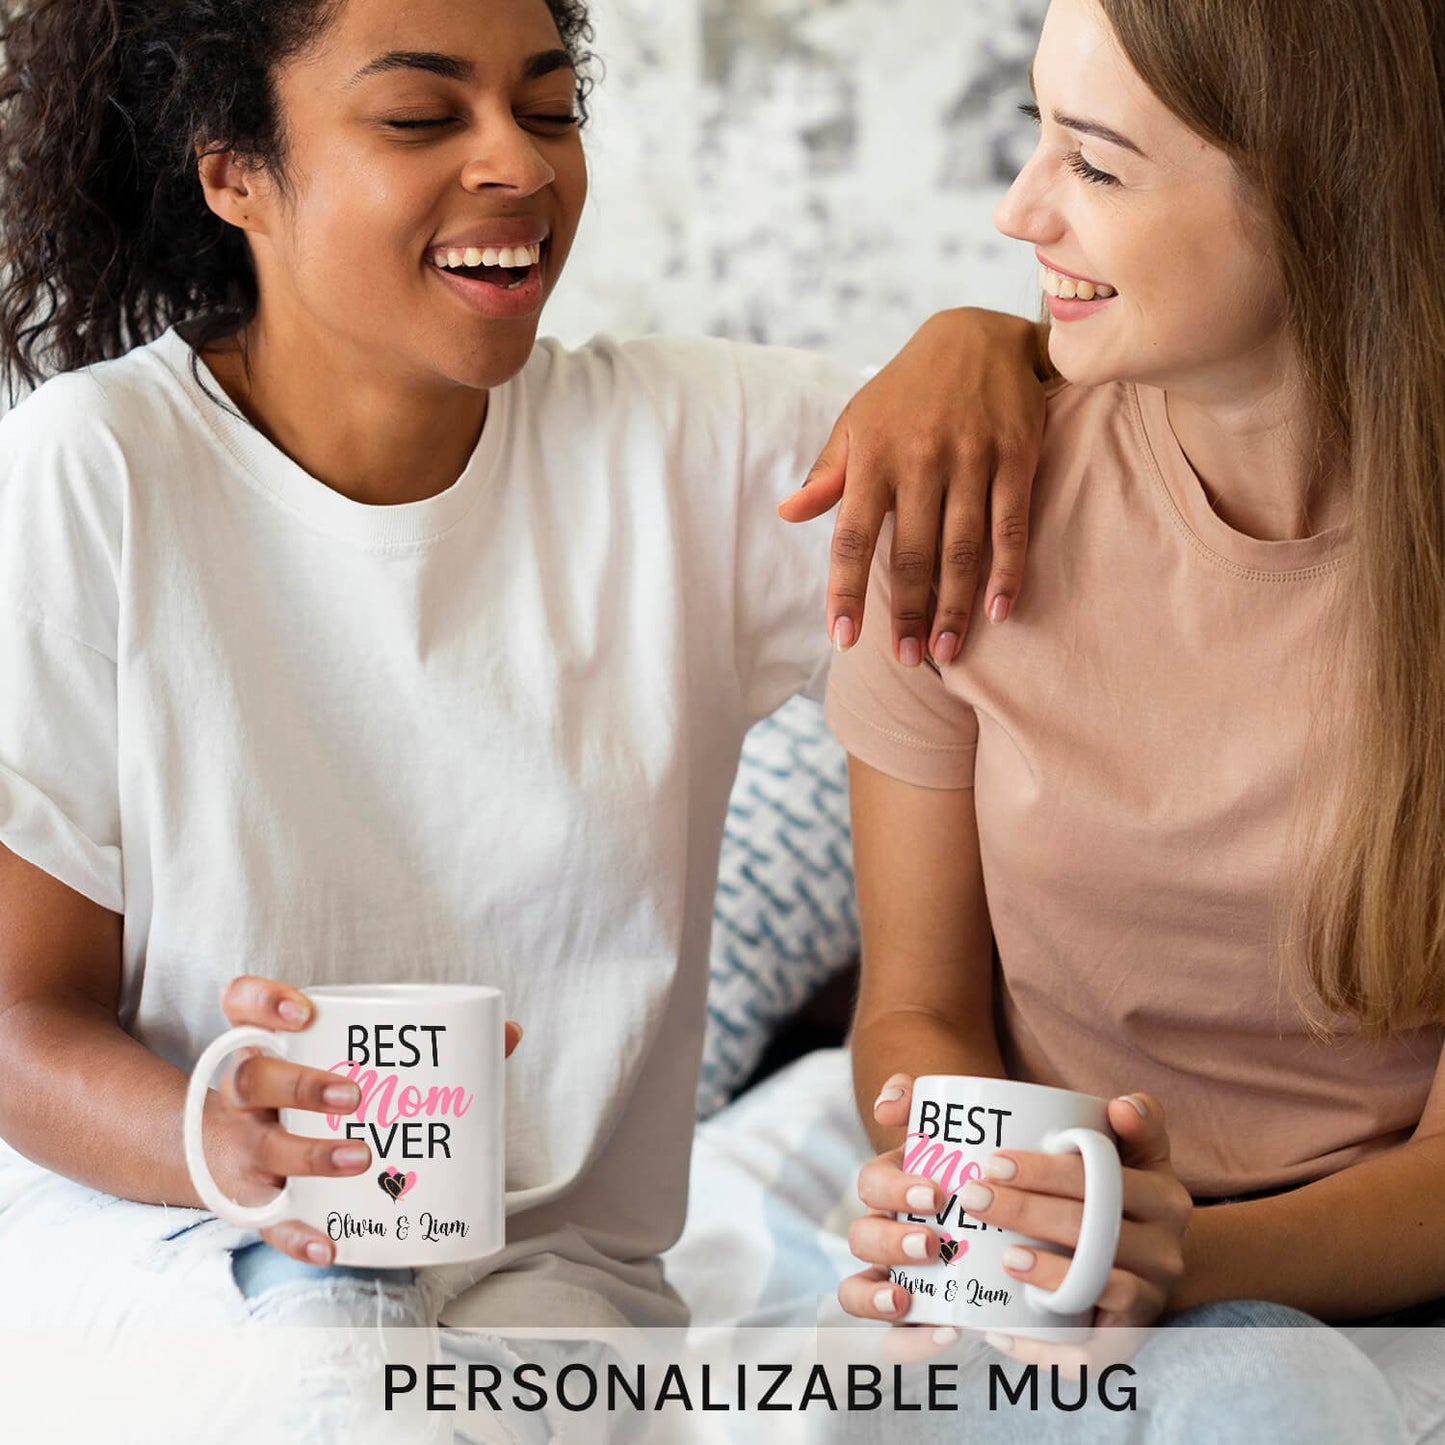 Personalized Mother's Day or Birthday gift for Mom - Best mom ever - custom Mug - MyMindfulGifts